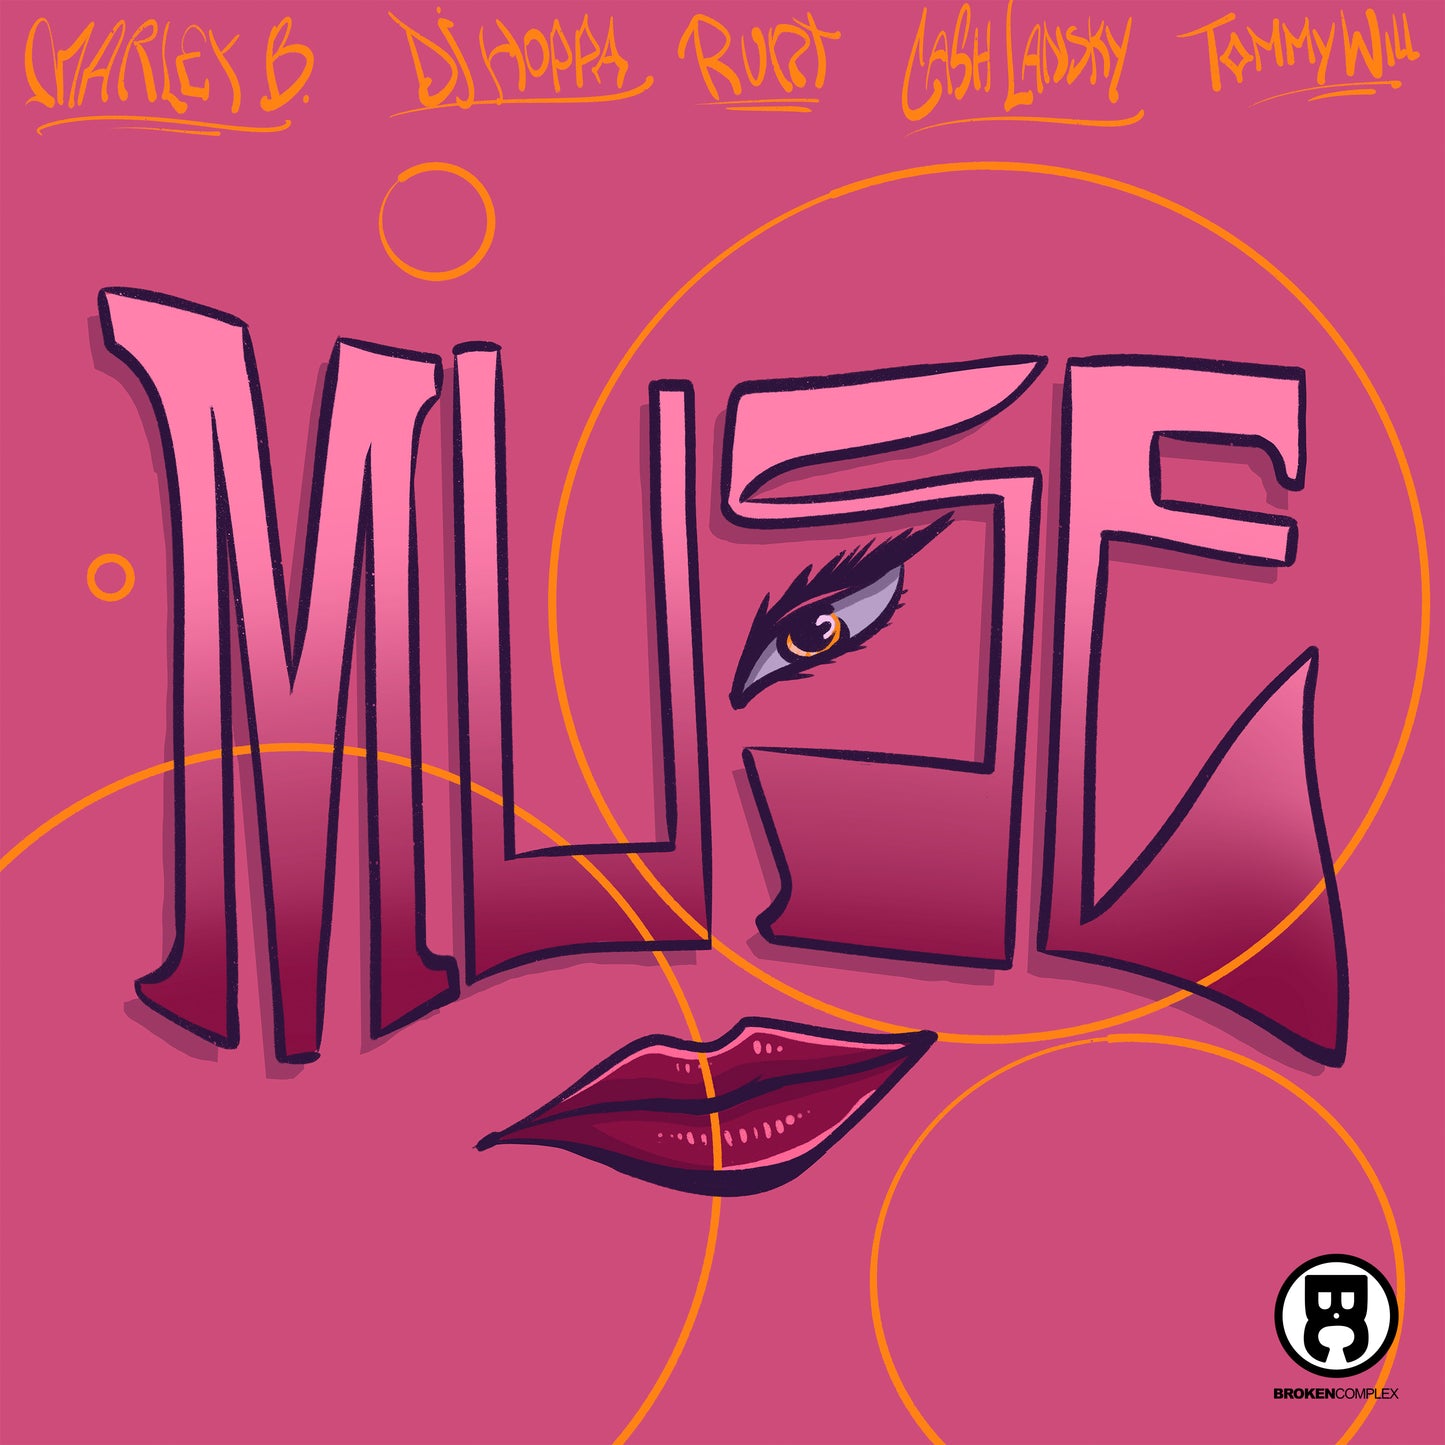 Muse feat. Cash Lansky, Runt, Tommy Will (Single)